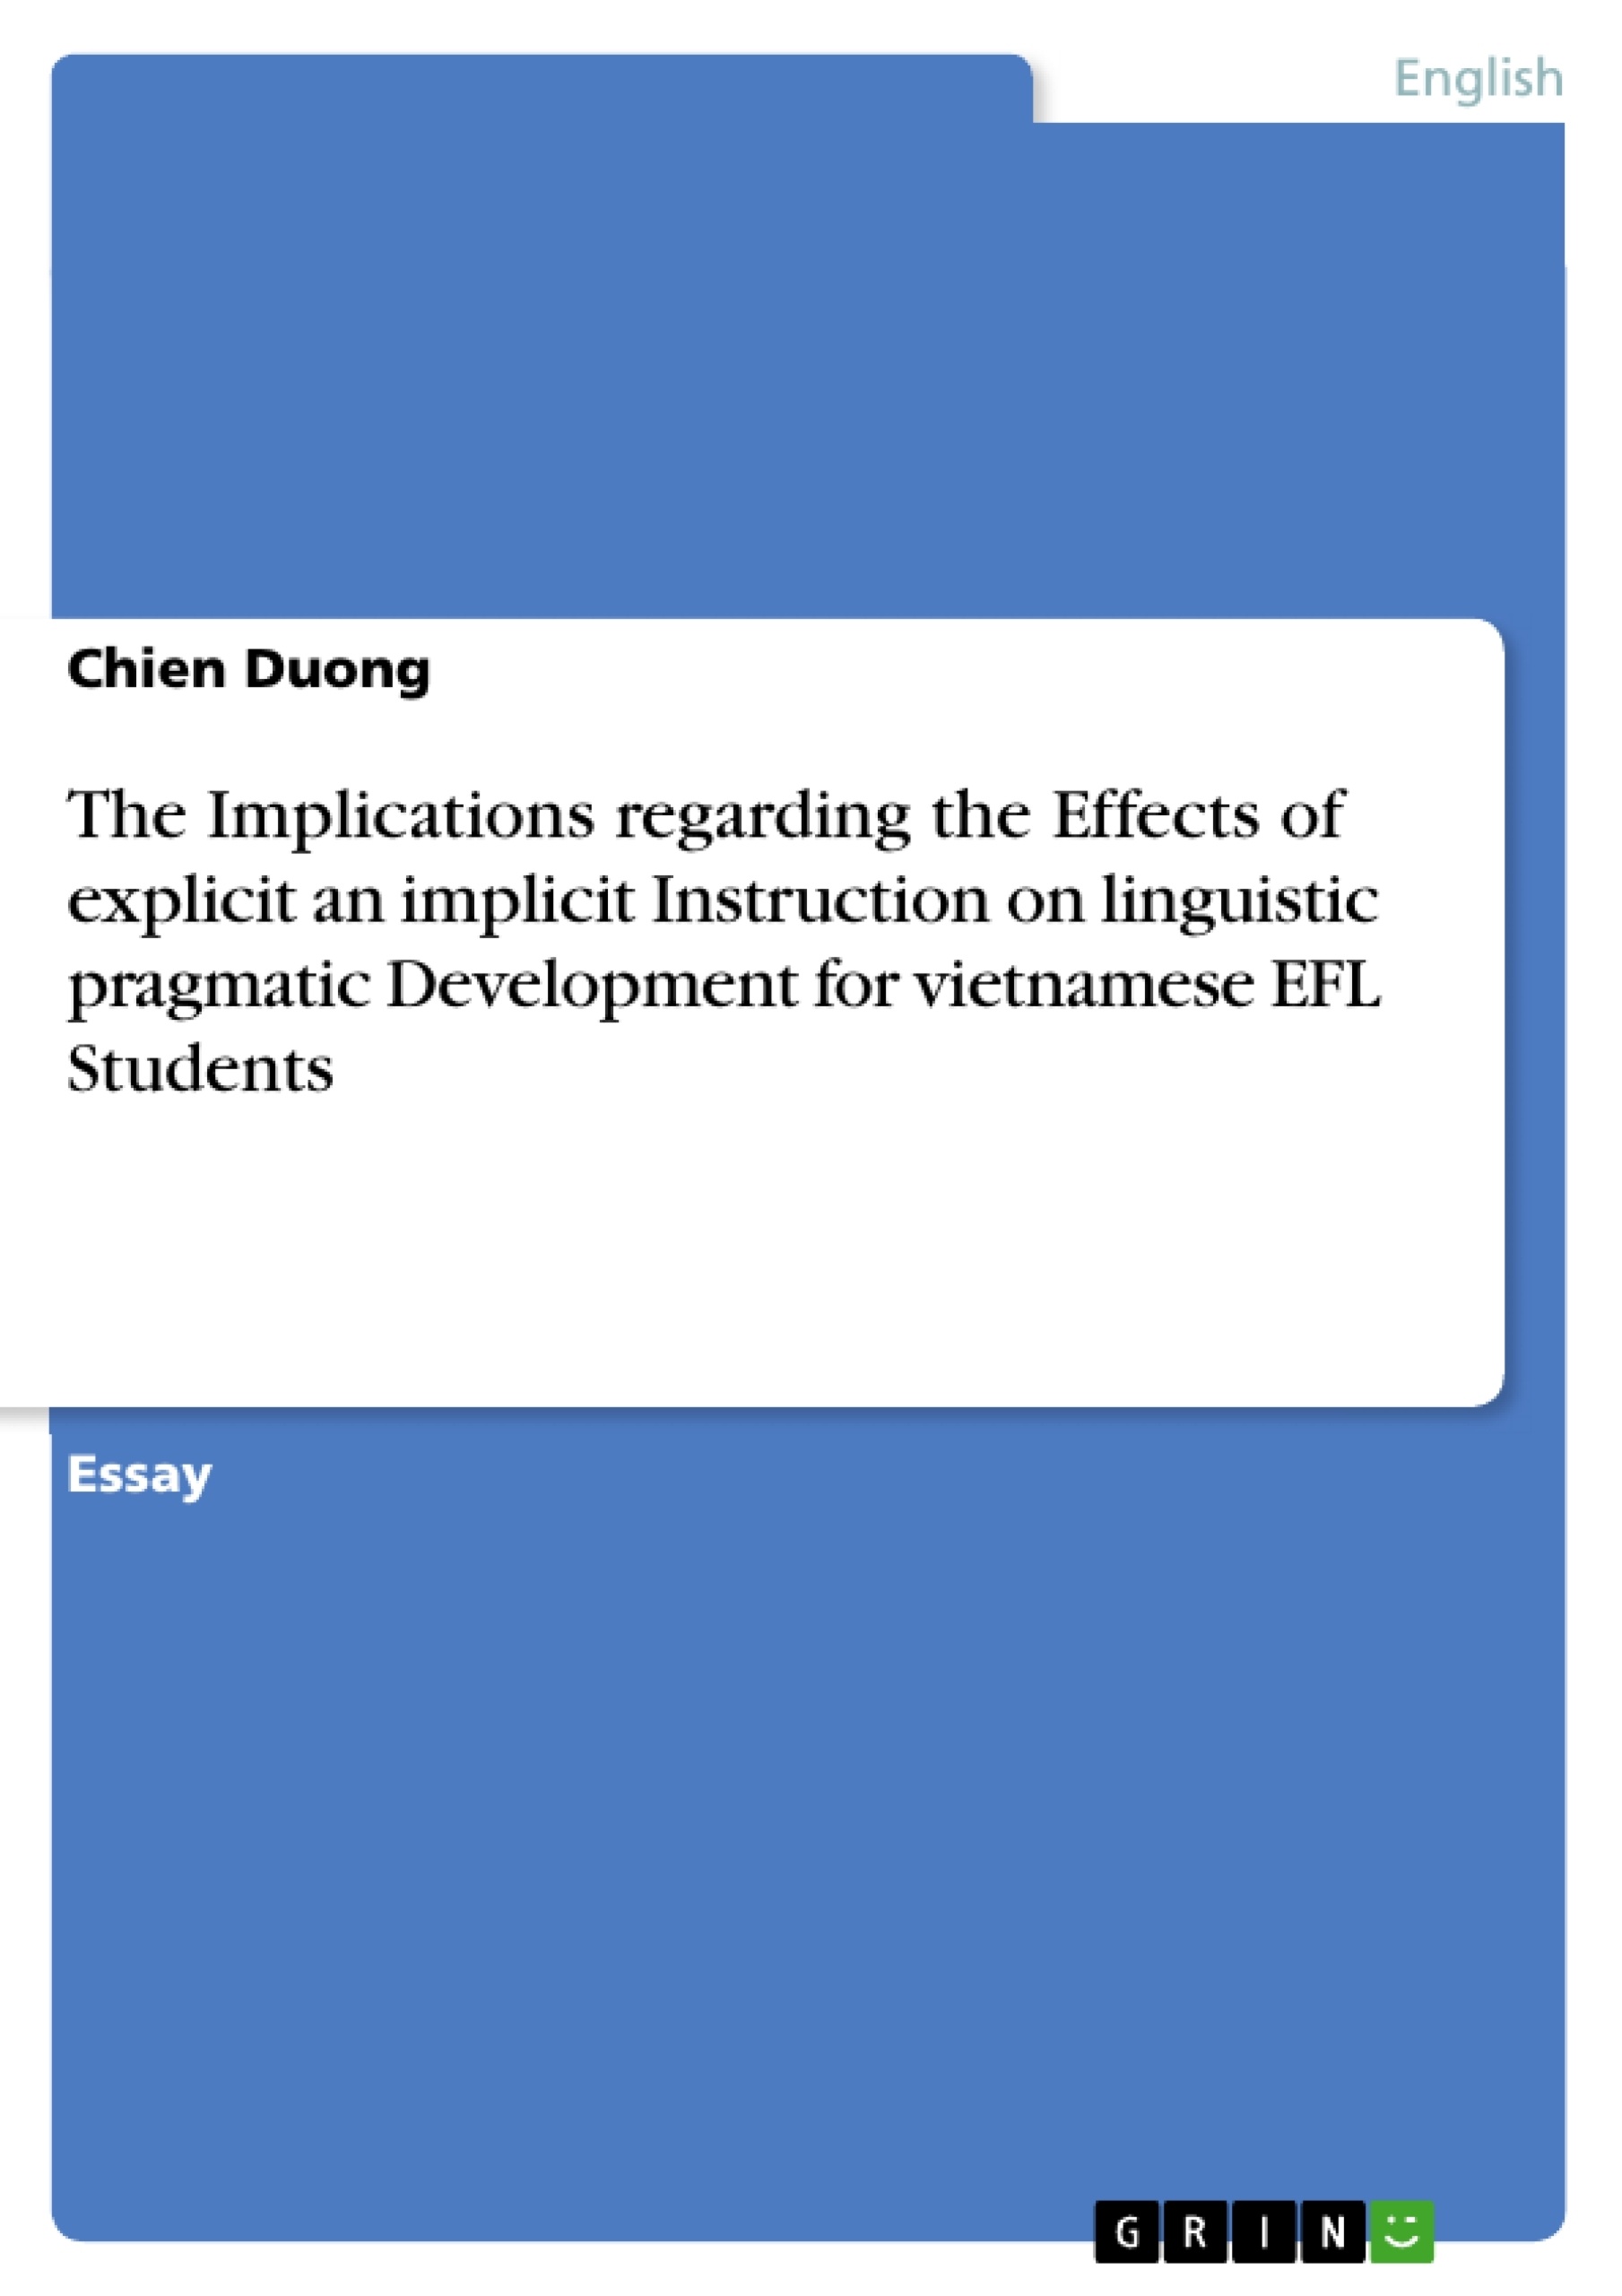 Título: The Implications regarding the Effects of explicit an implicit Instruction on linguistic pragmatic Development for vietnamese EFL Students